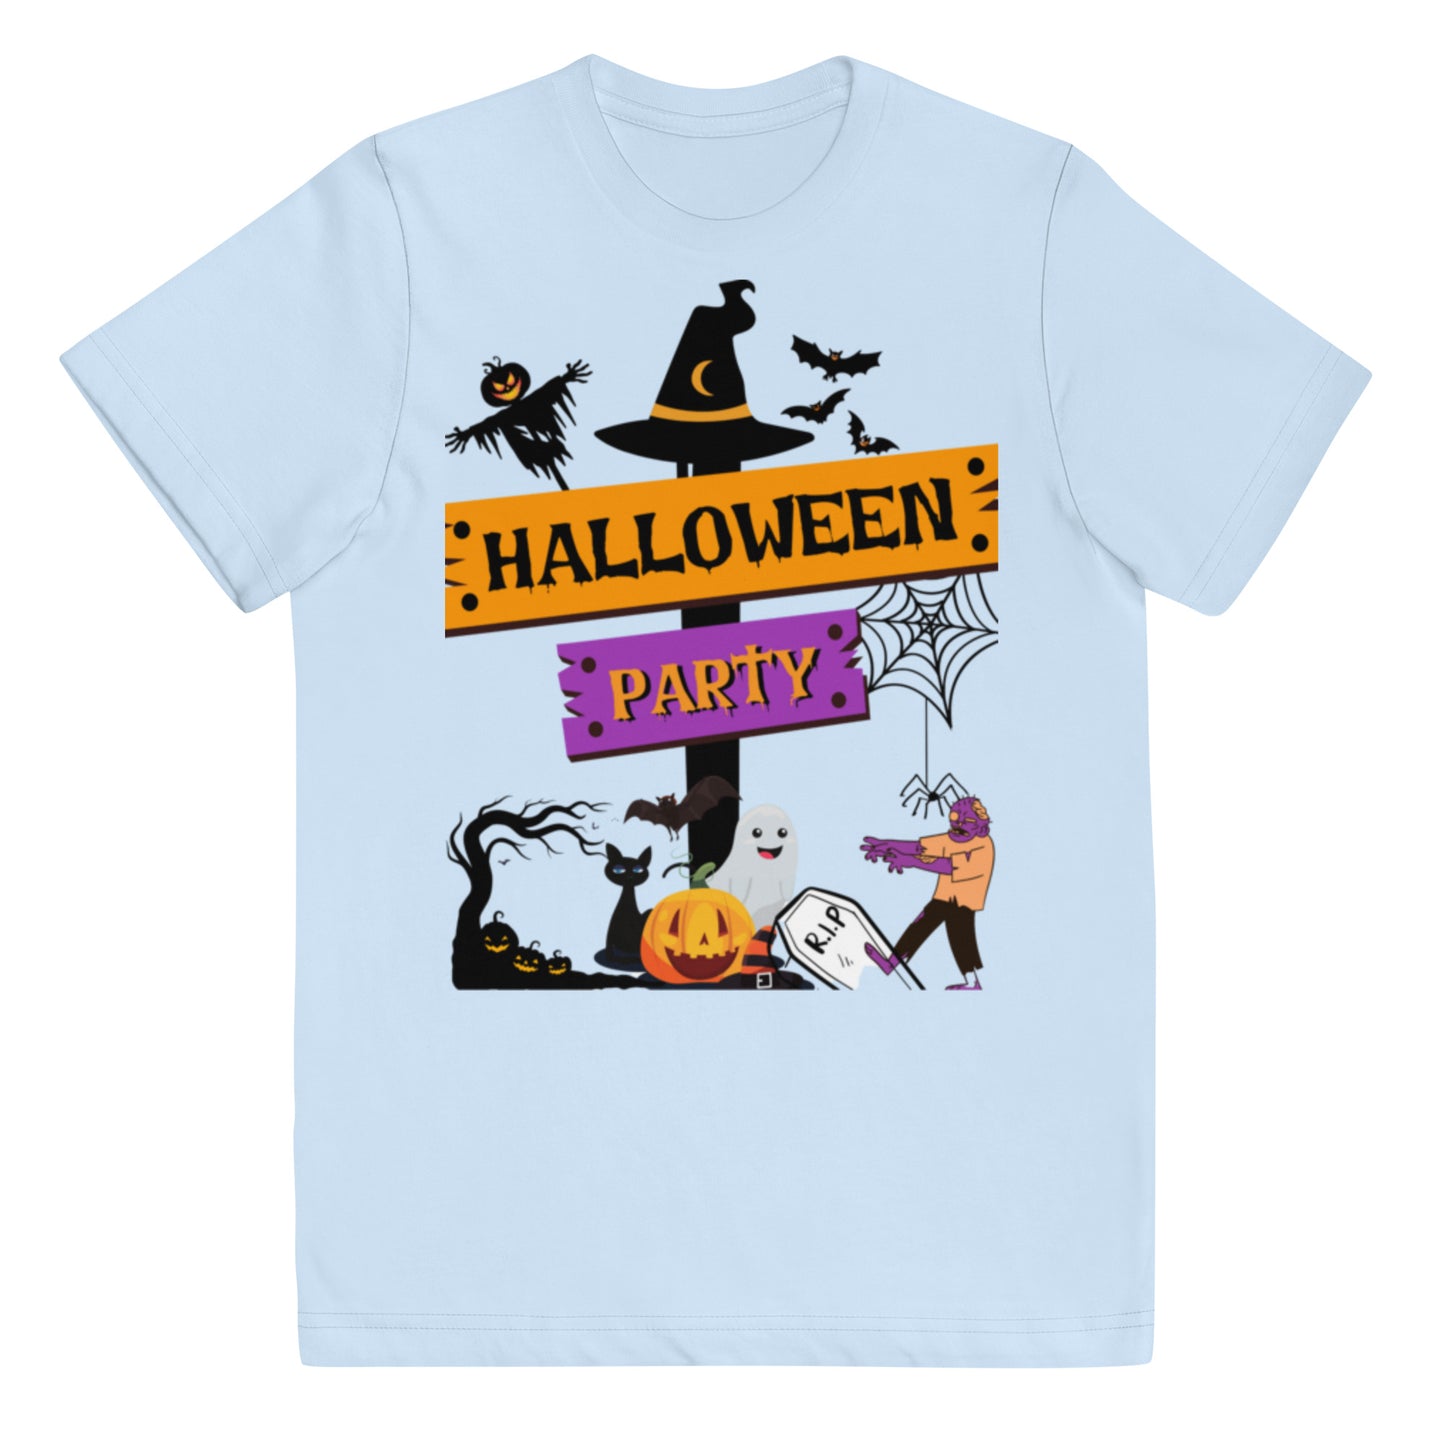 Halloween Party Youth jersey t-shirt